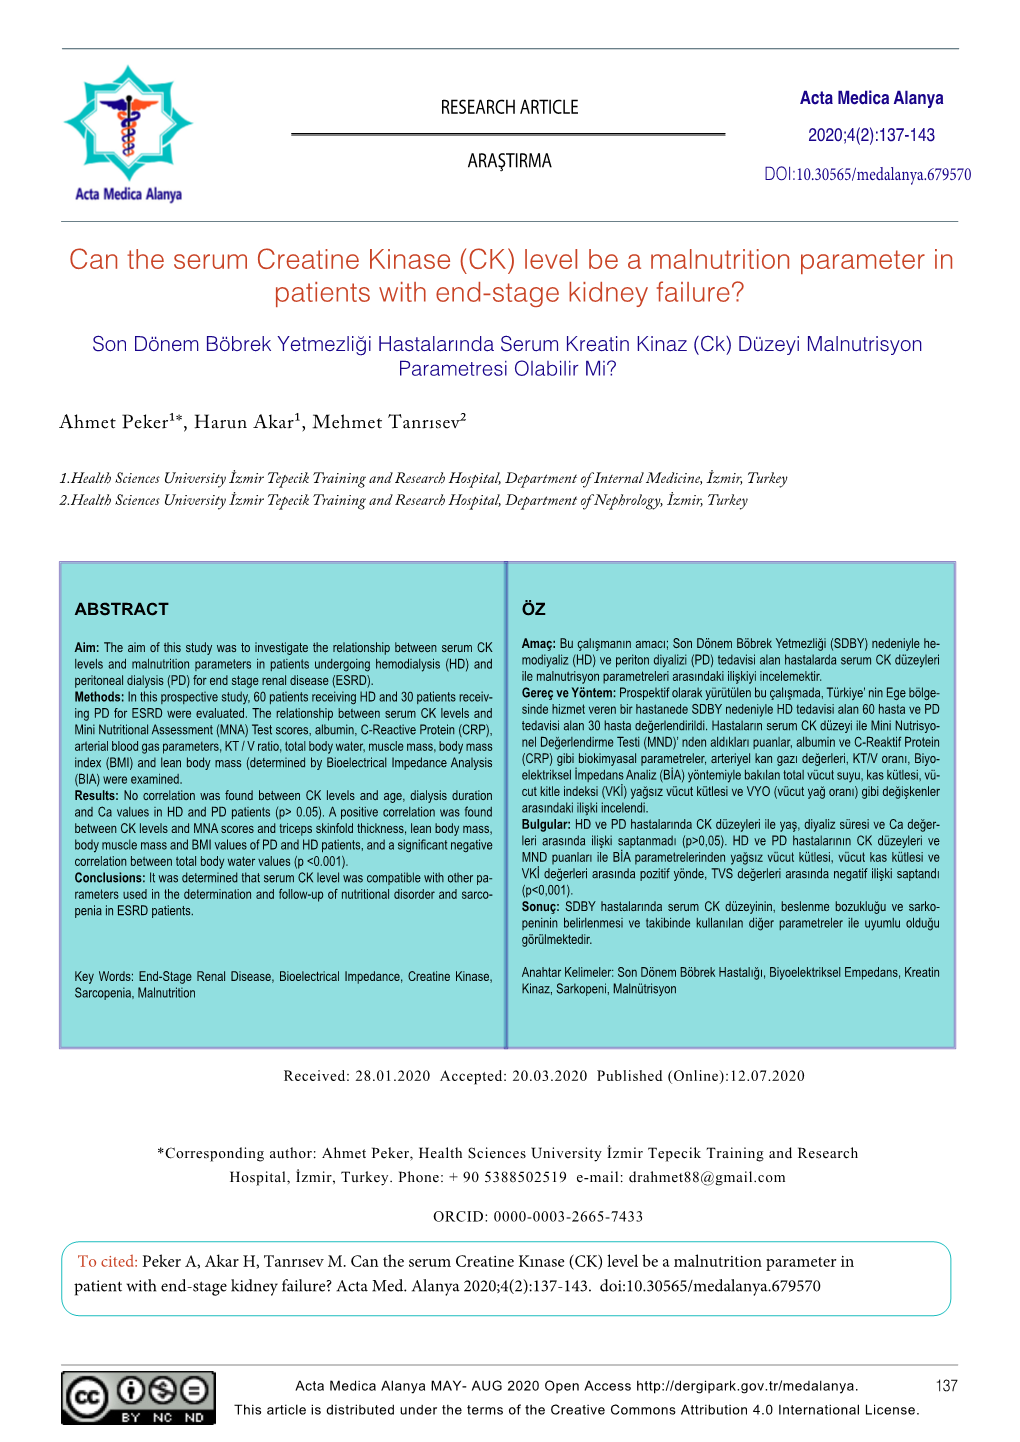 Can the Serum Creatine Kinase (CK) Level Be a Malnutrition Parameter in Patients with End-Stage Kidney Failure?